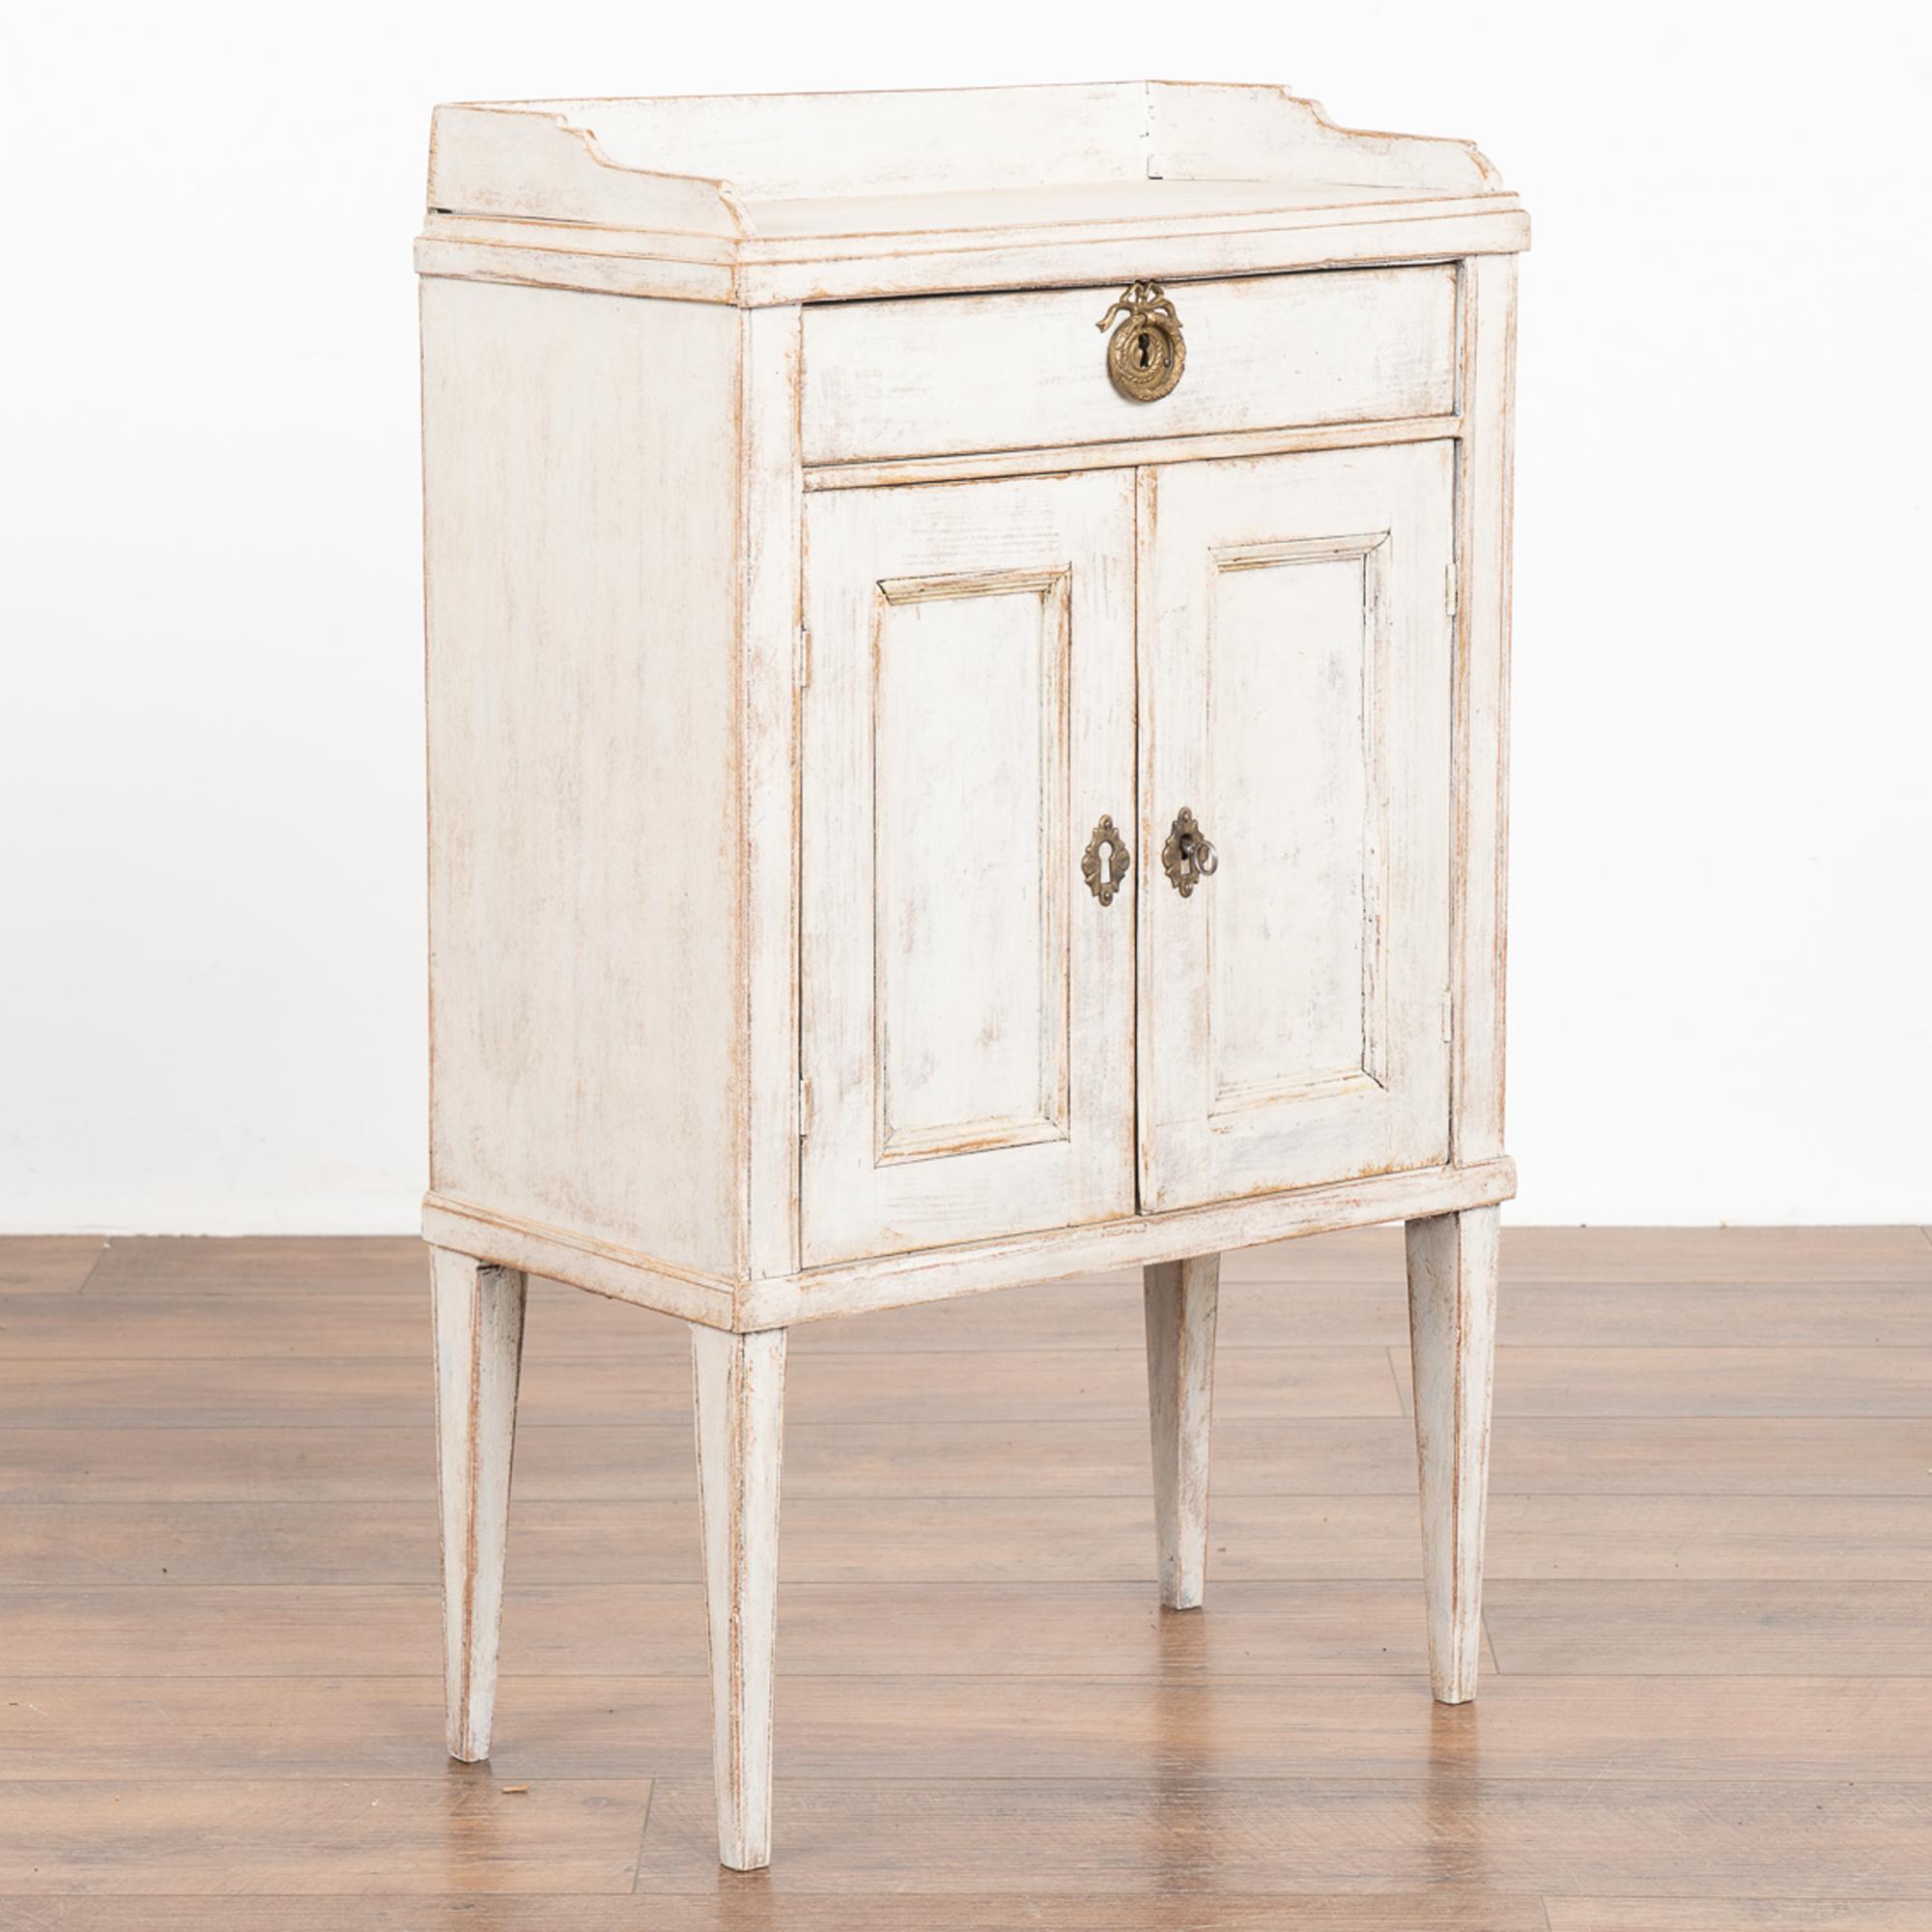 Small Swedish country white painted cabinet standing on tapered legs that may serve also as a nightstand or side table.
A single drawer with brass pull rests above two simple paneled doors.
The lock functions on the right cabinet door and key is